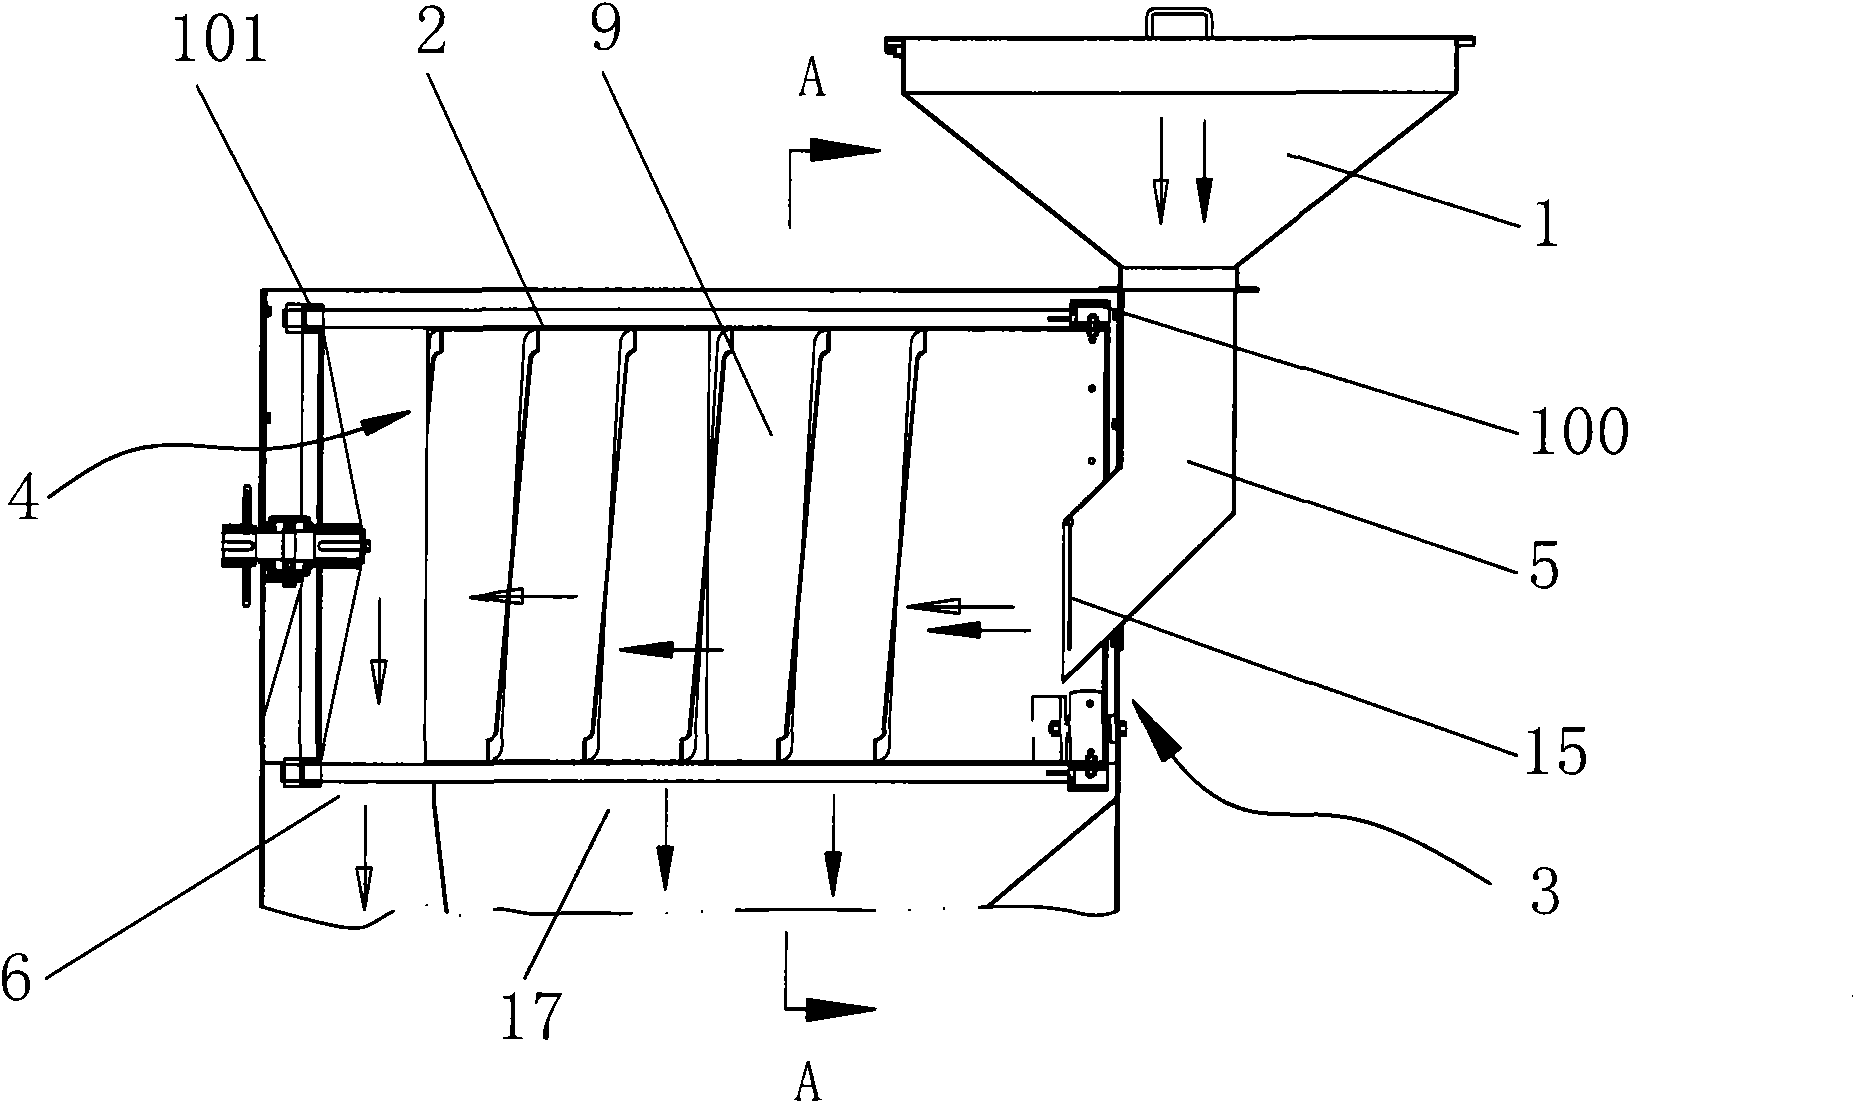 Cylindrical pre-cleaning screen